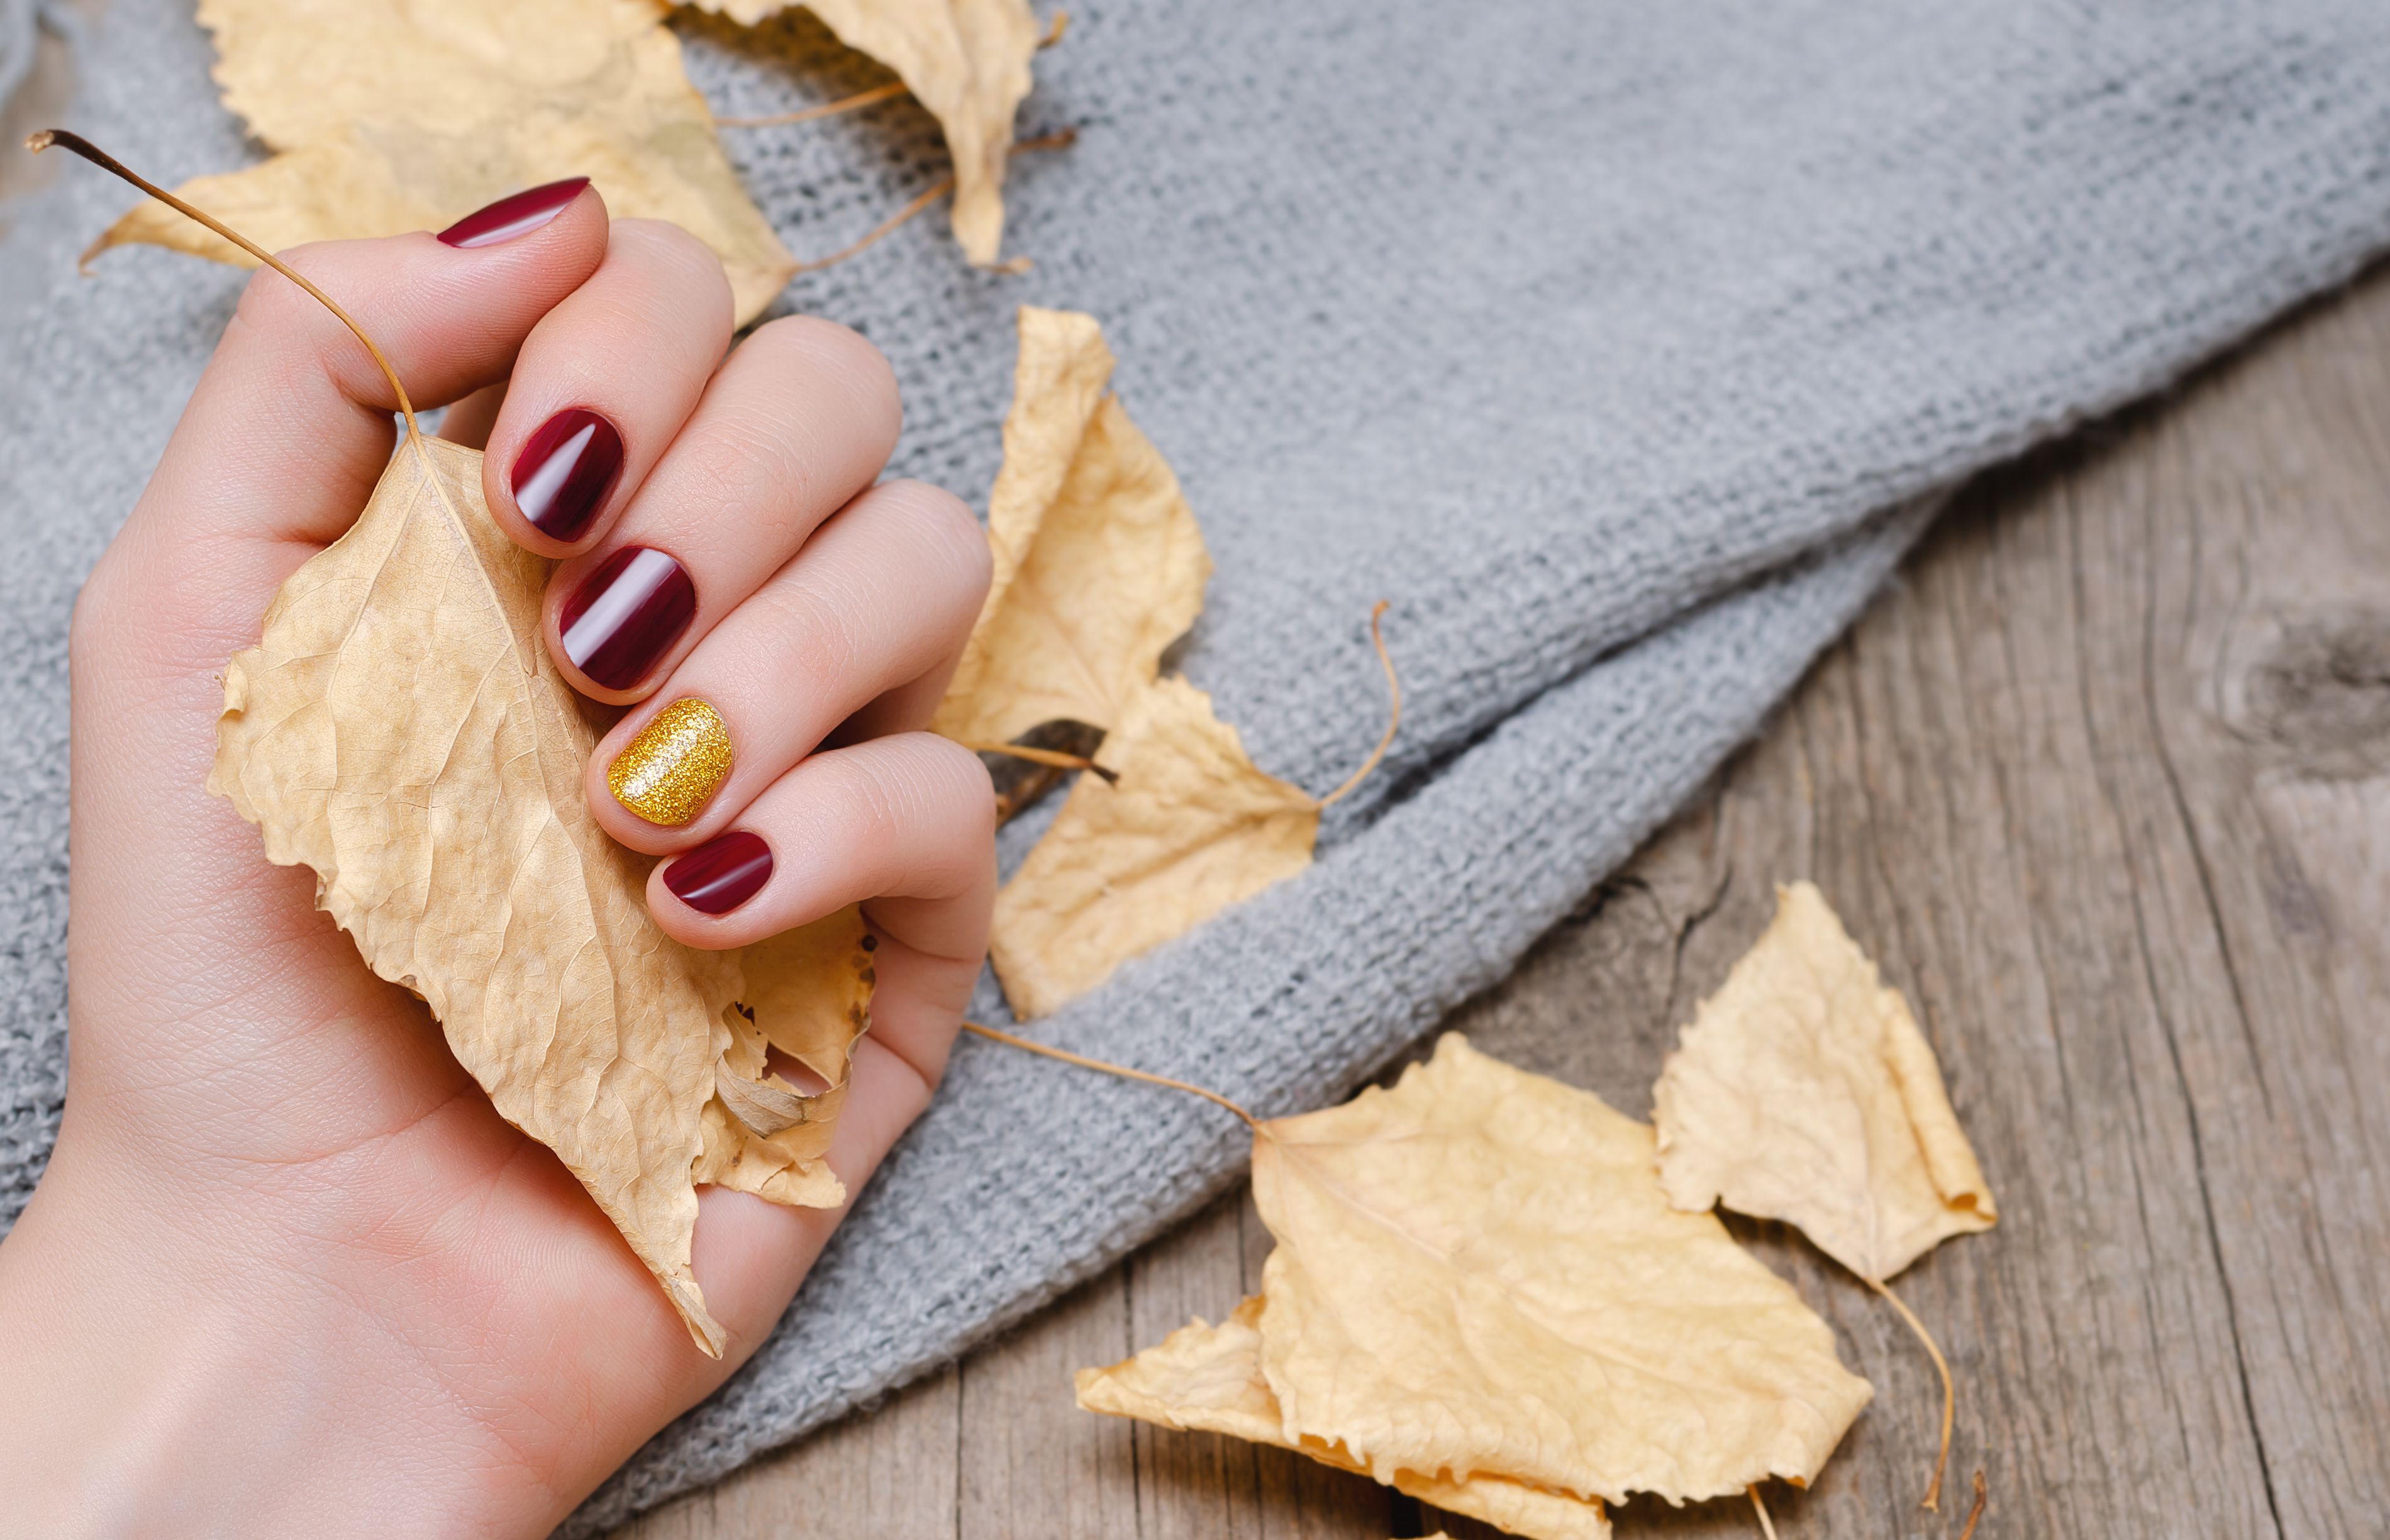 4. Short Nail Designs with Fall Colors - wide 5